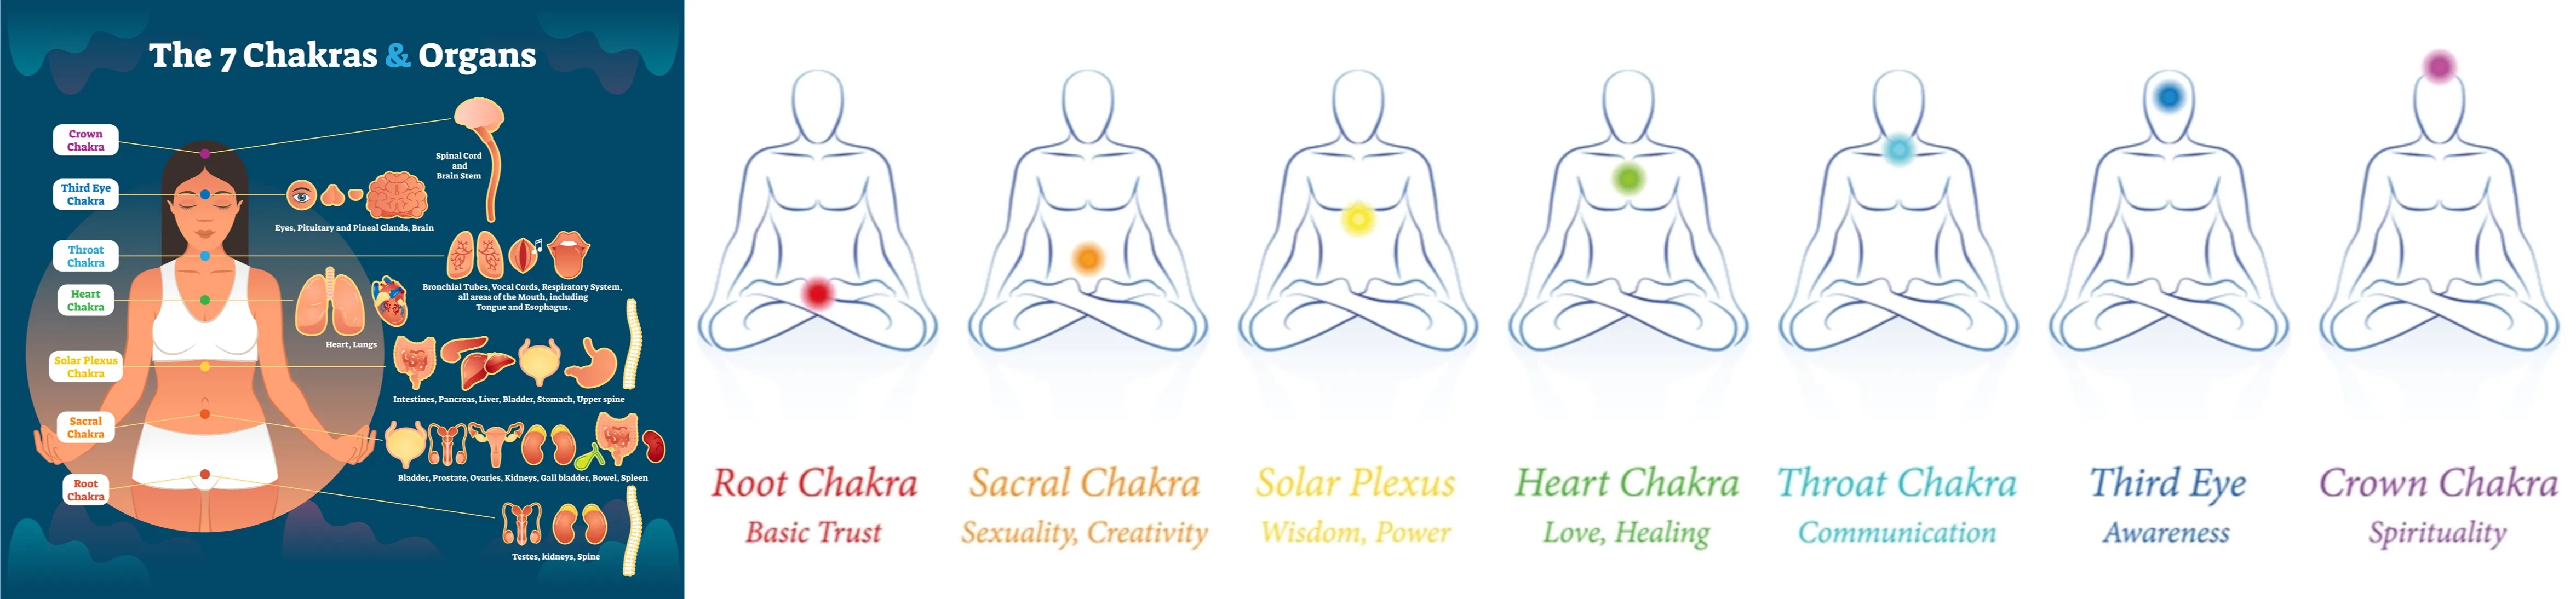 The seven human Chakras (Energy Centers) and organs represent respective influential emotions. (The emotional settings I brought are slightly broader.)